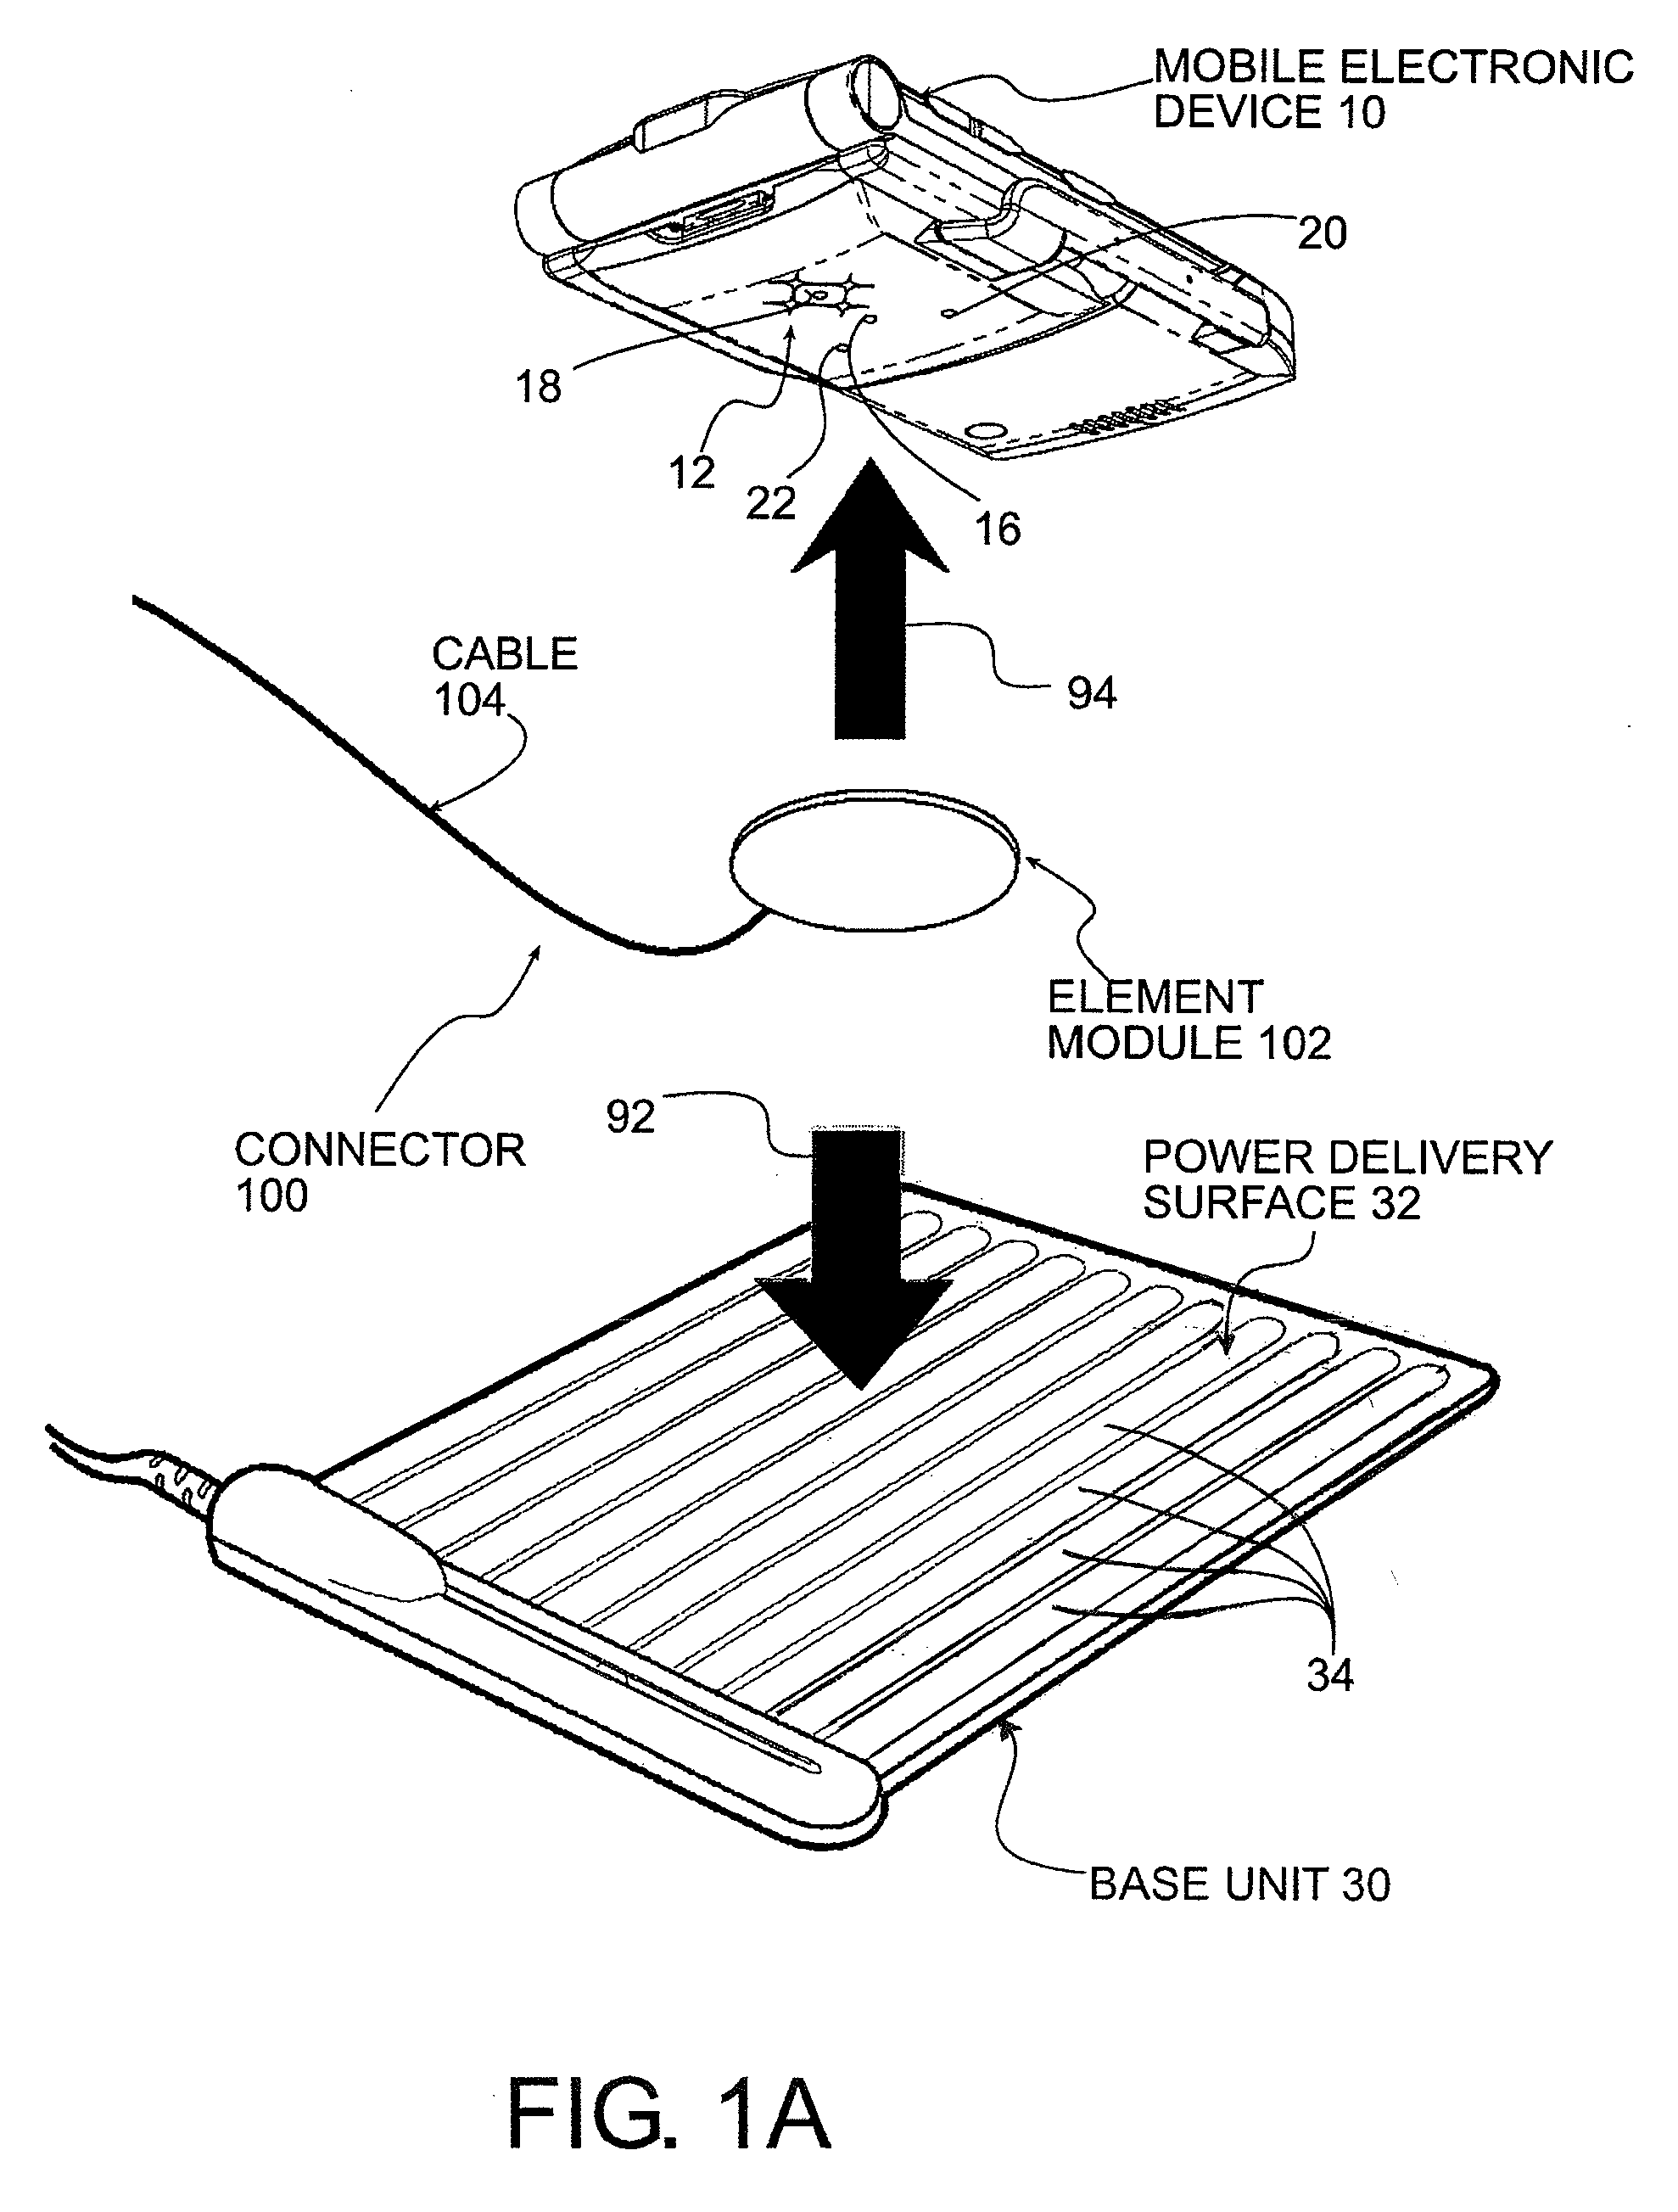 Connector for providing power to a mobile electronic device